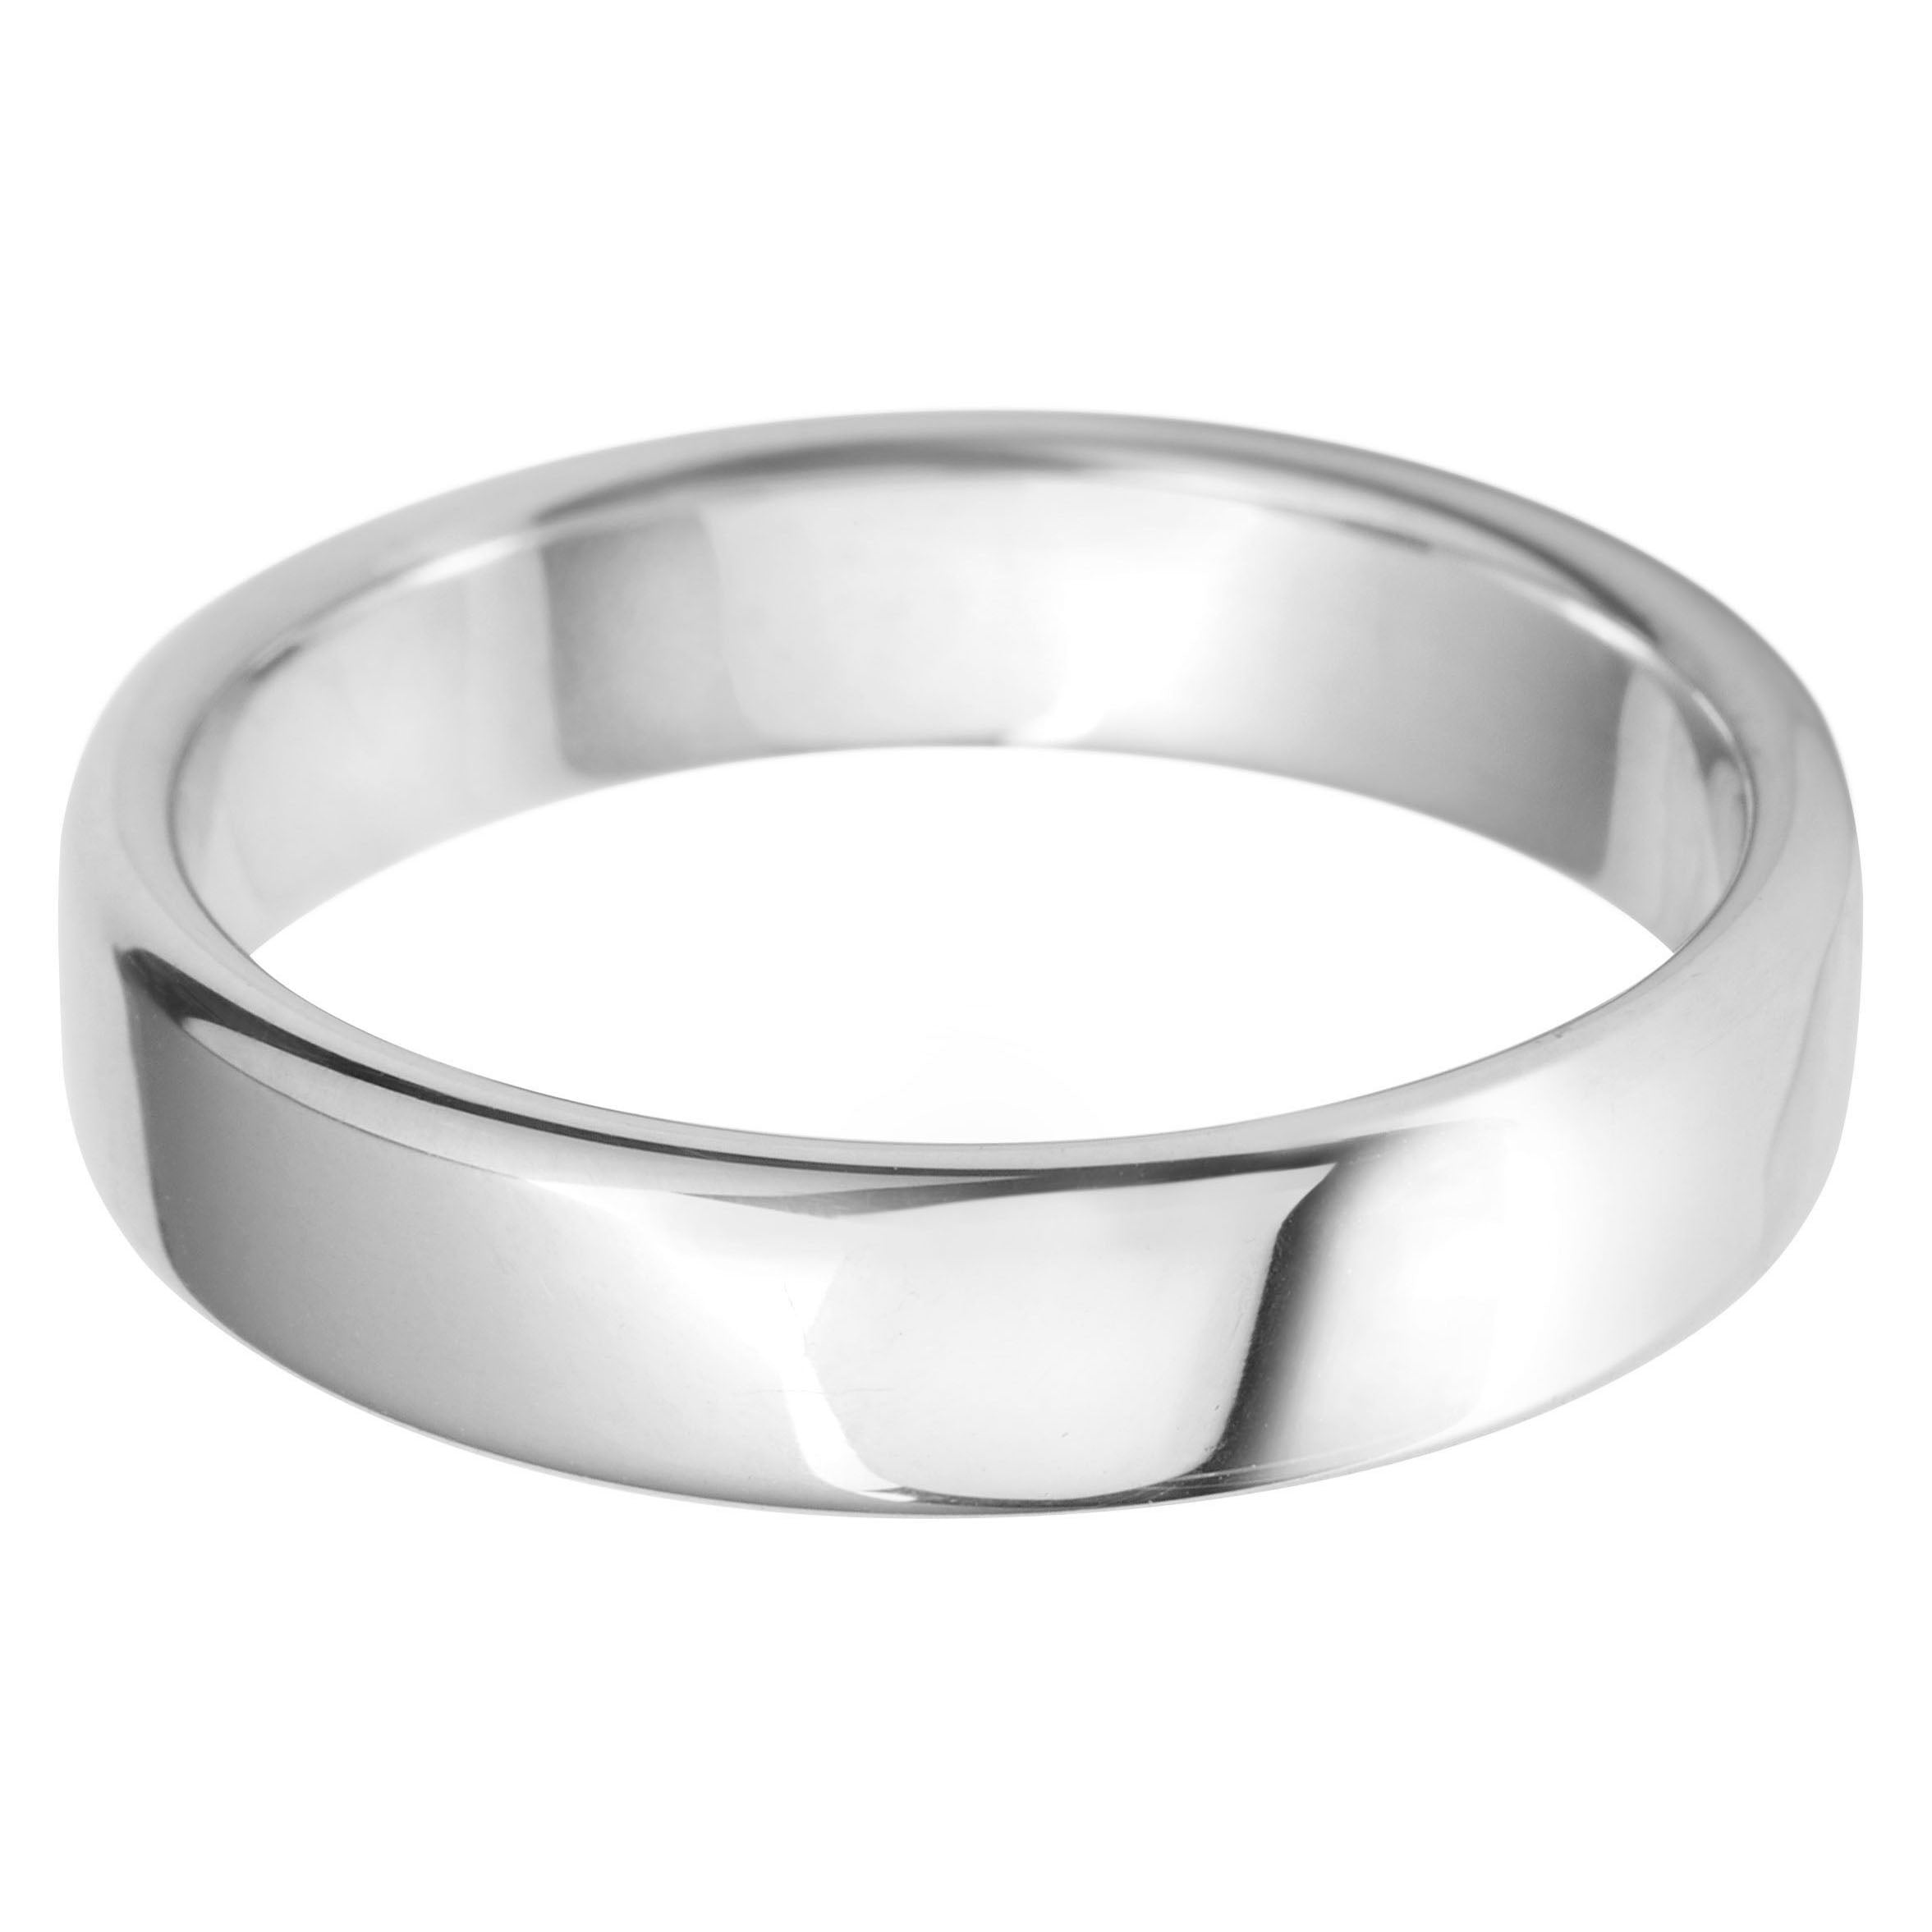 5mm Rounded Flat Heavy Weight Wedding Ring